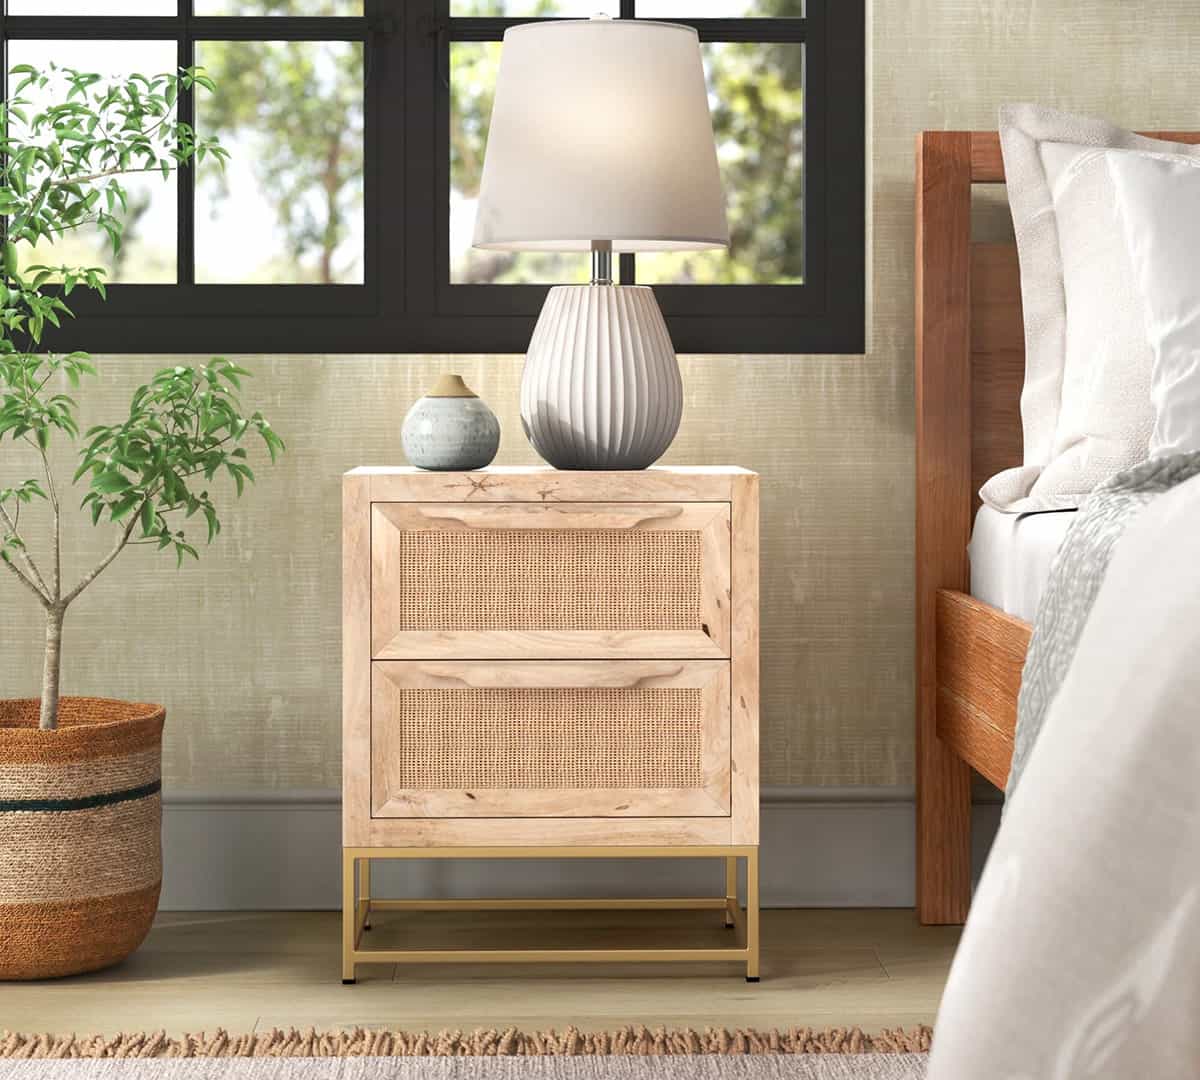 Modern wicker nightstand with gold base adorned with small clay pot and white resin lamp with shade in airy bedroom setting.